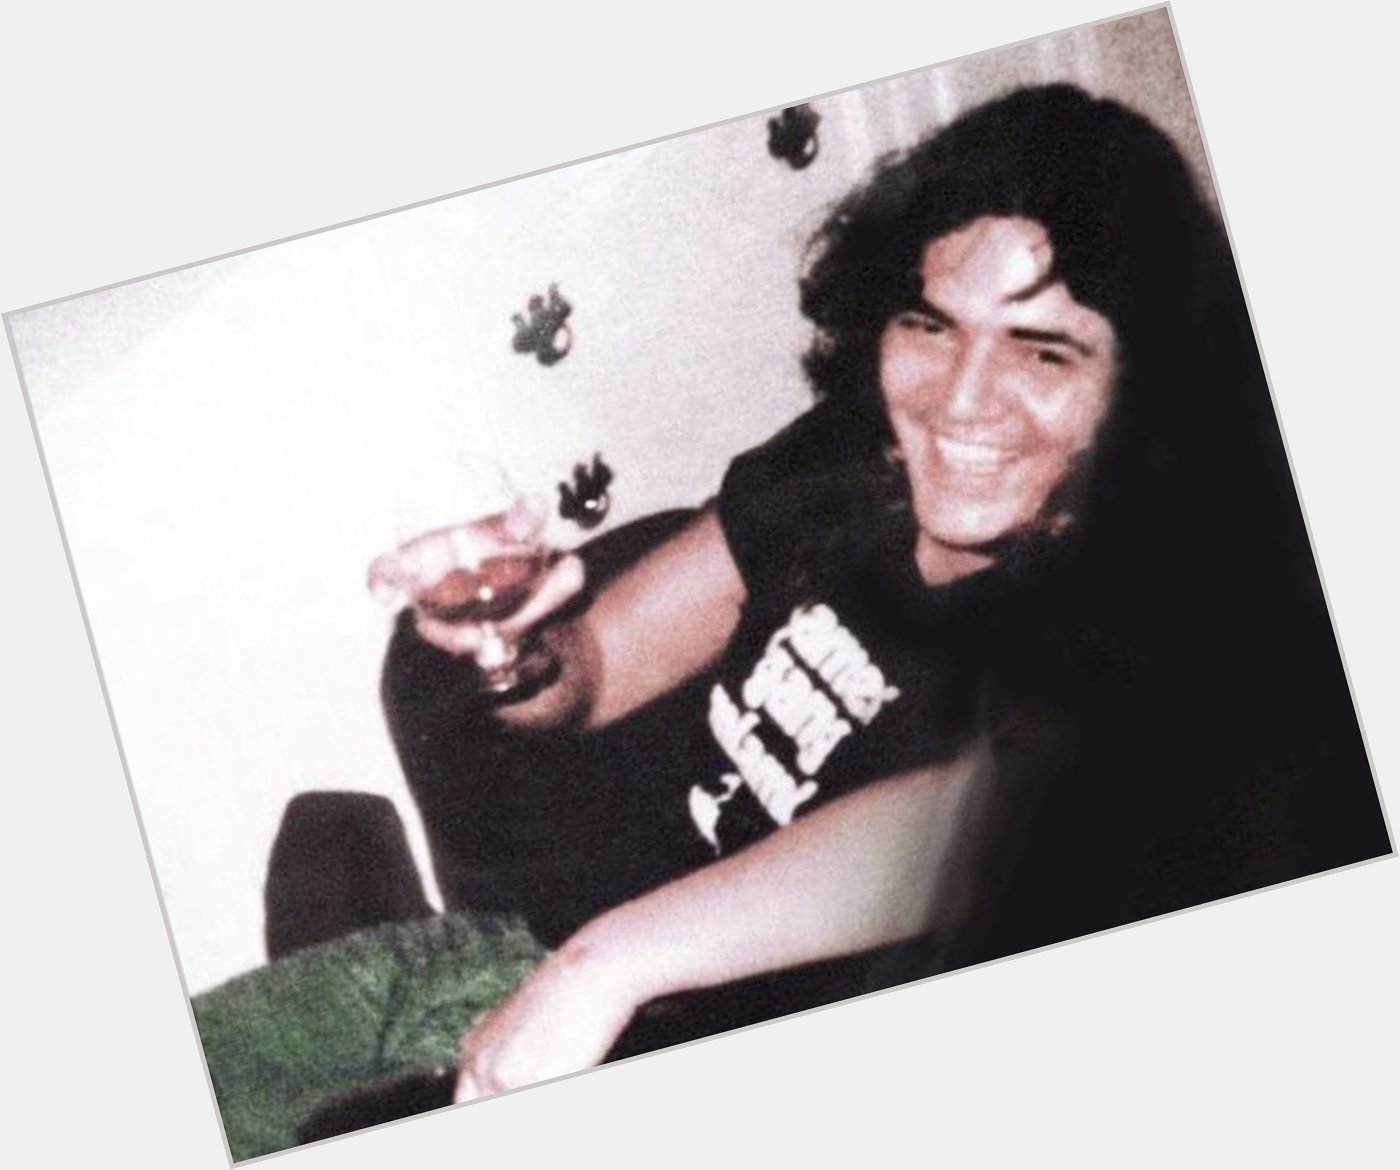    Happy birthday to Tommy Bolin, who would have turned 70 today. 